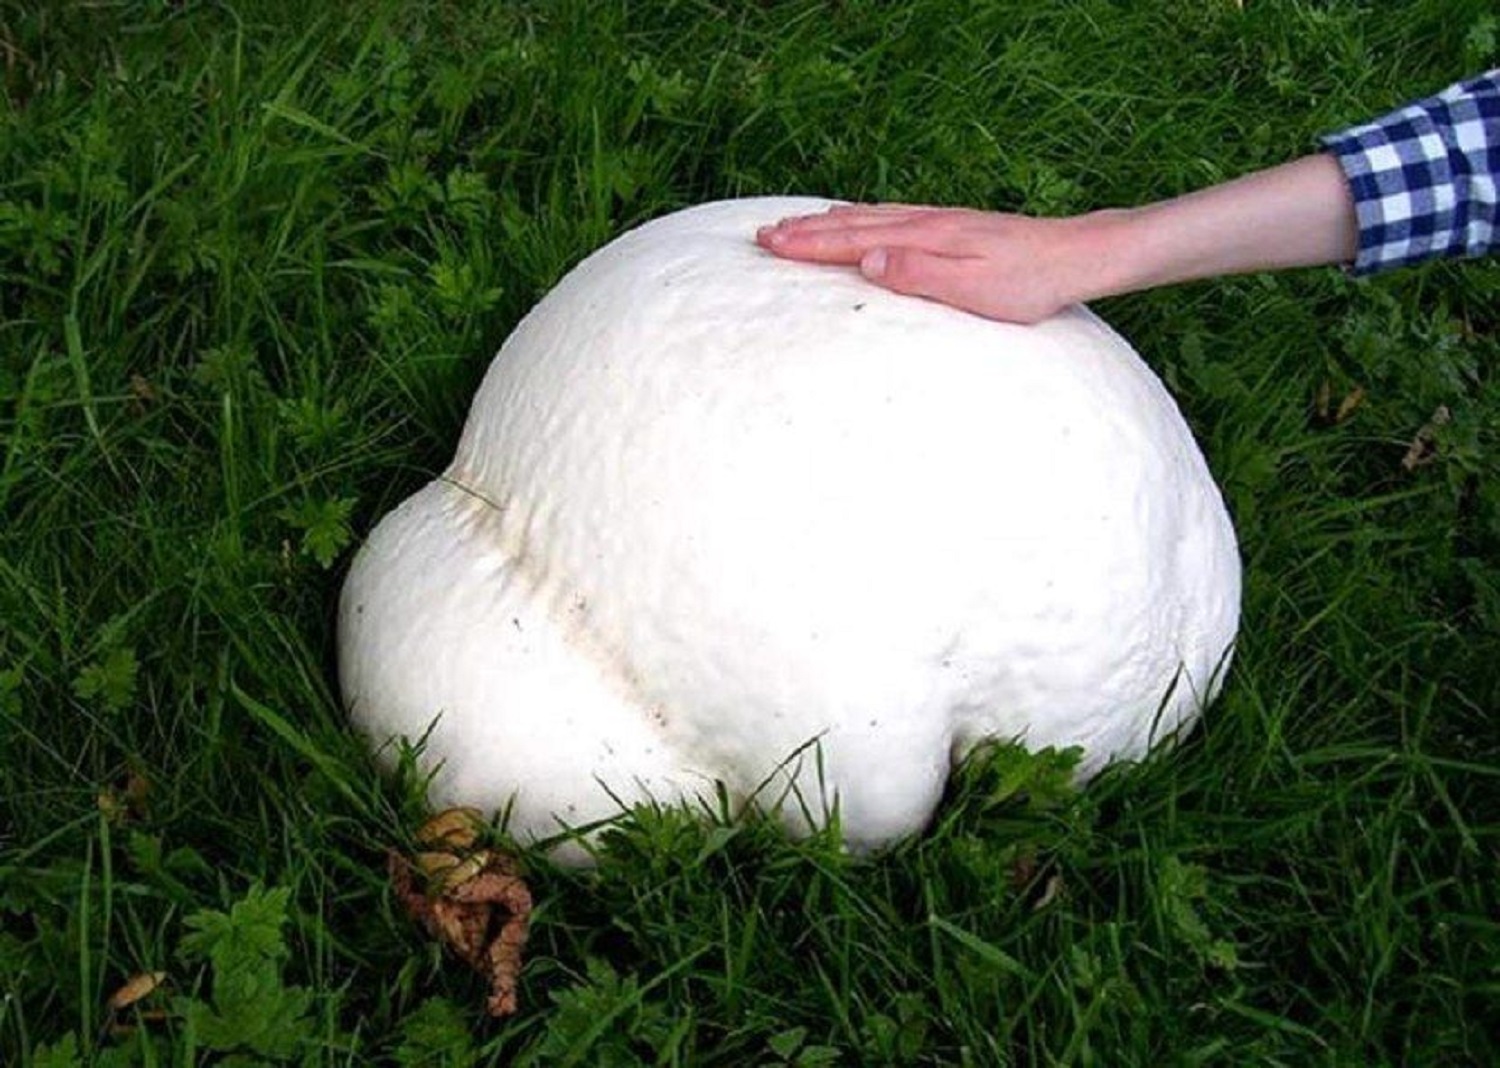 The flesh of a puffball is called the gleba, and when immature (and edible) it is pure white and has the texture of marshmallow. Once mature the gleba’s color changes to yellow and brown and should not be eaten at this stage because of its poor taste and possible toxicity. In addition to a change in color the gleba becomes powdery at maturity due to the spores and capillitium (sterile threads that hold the spores).